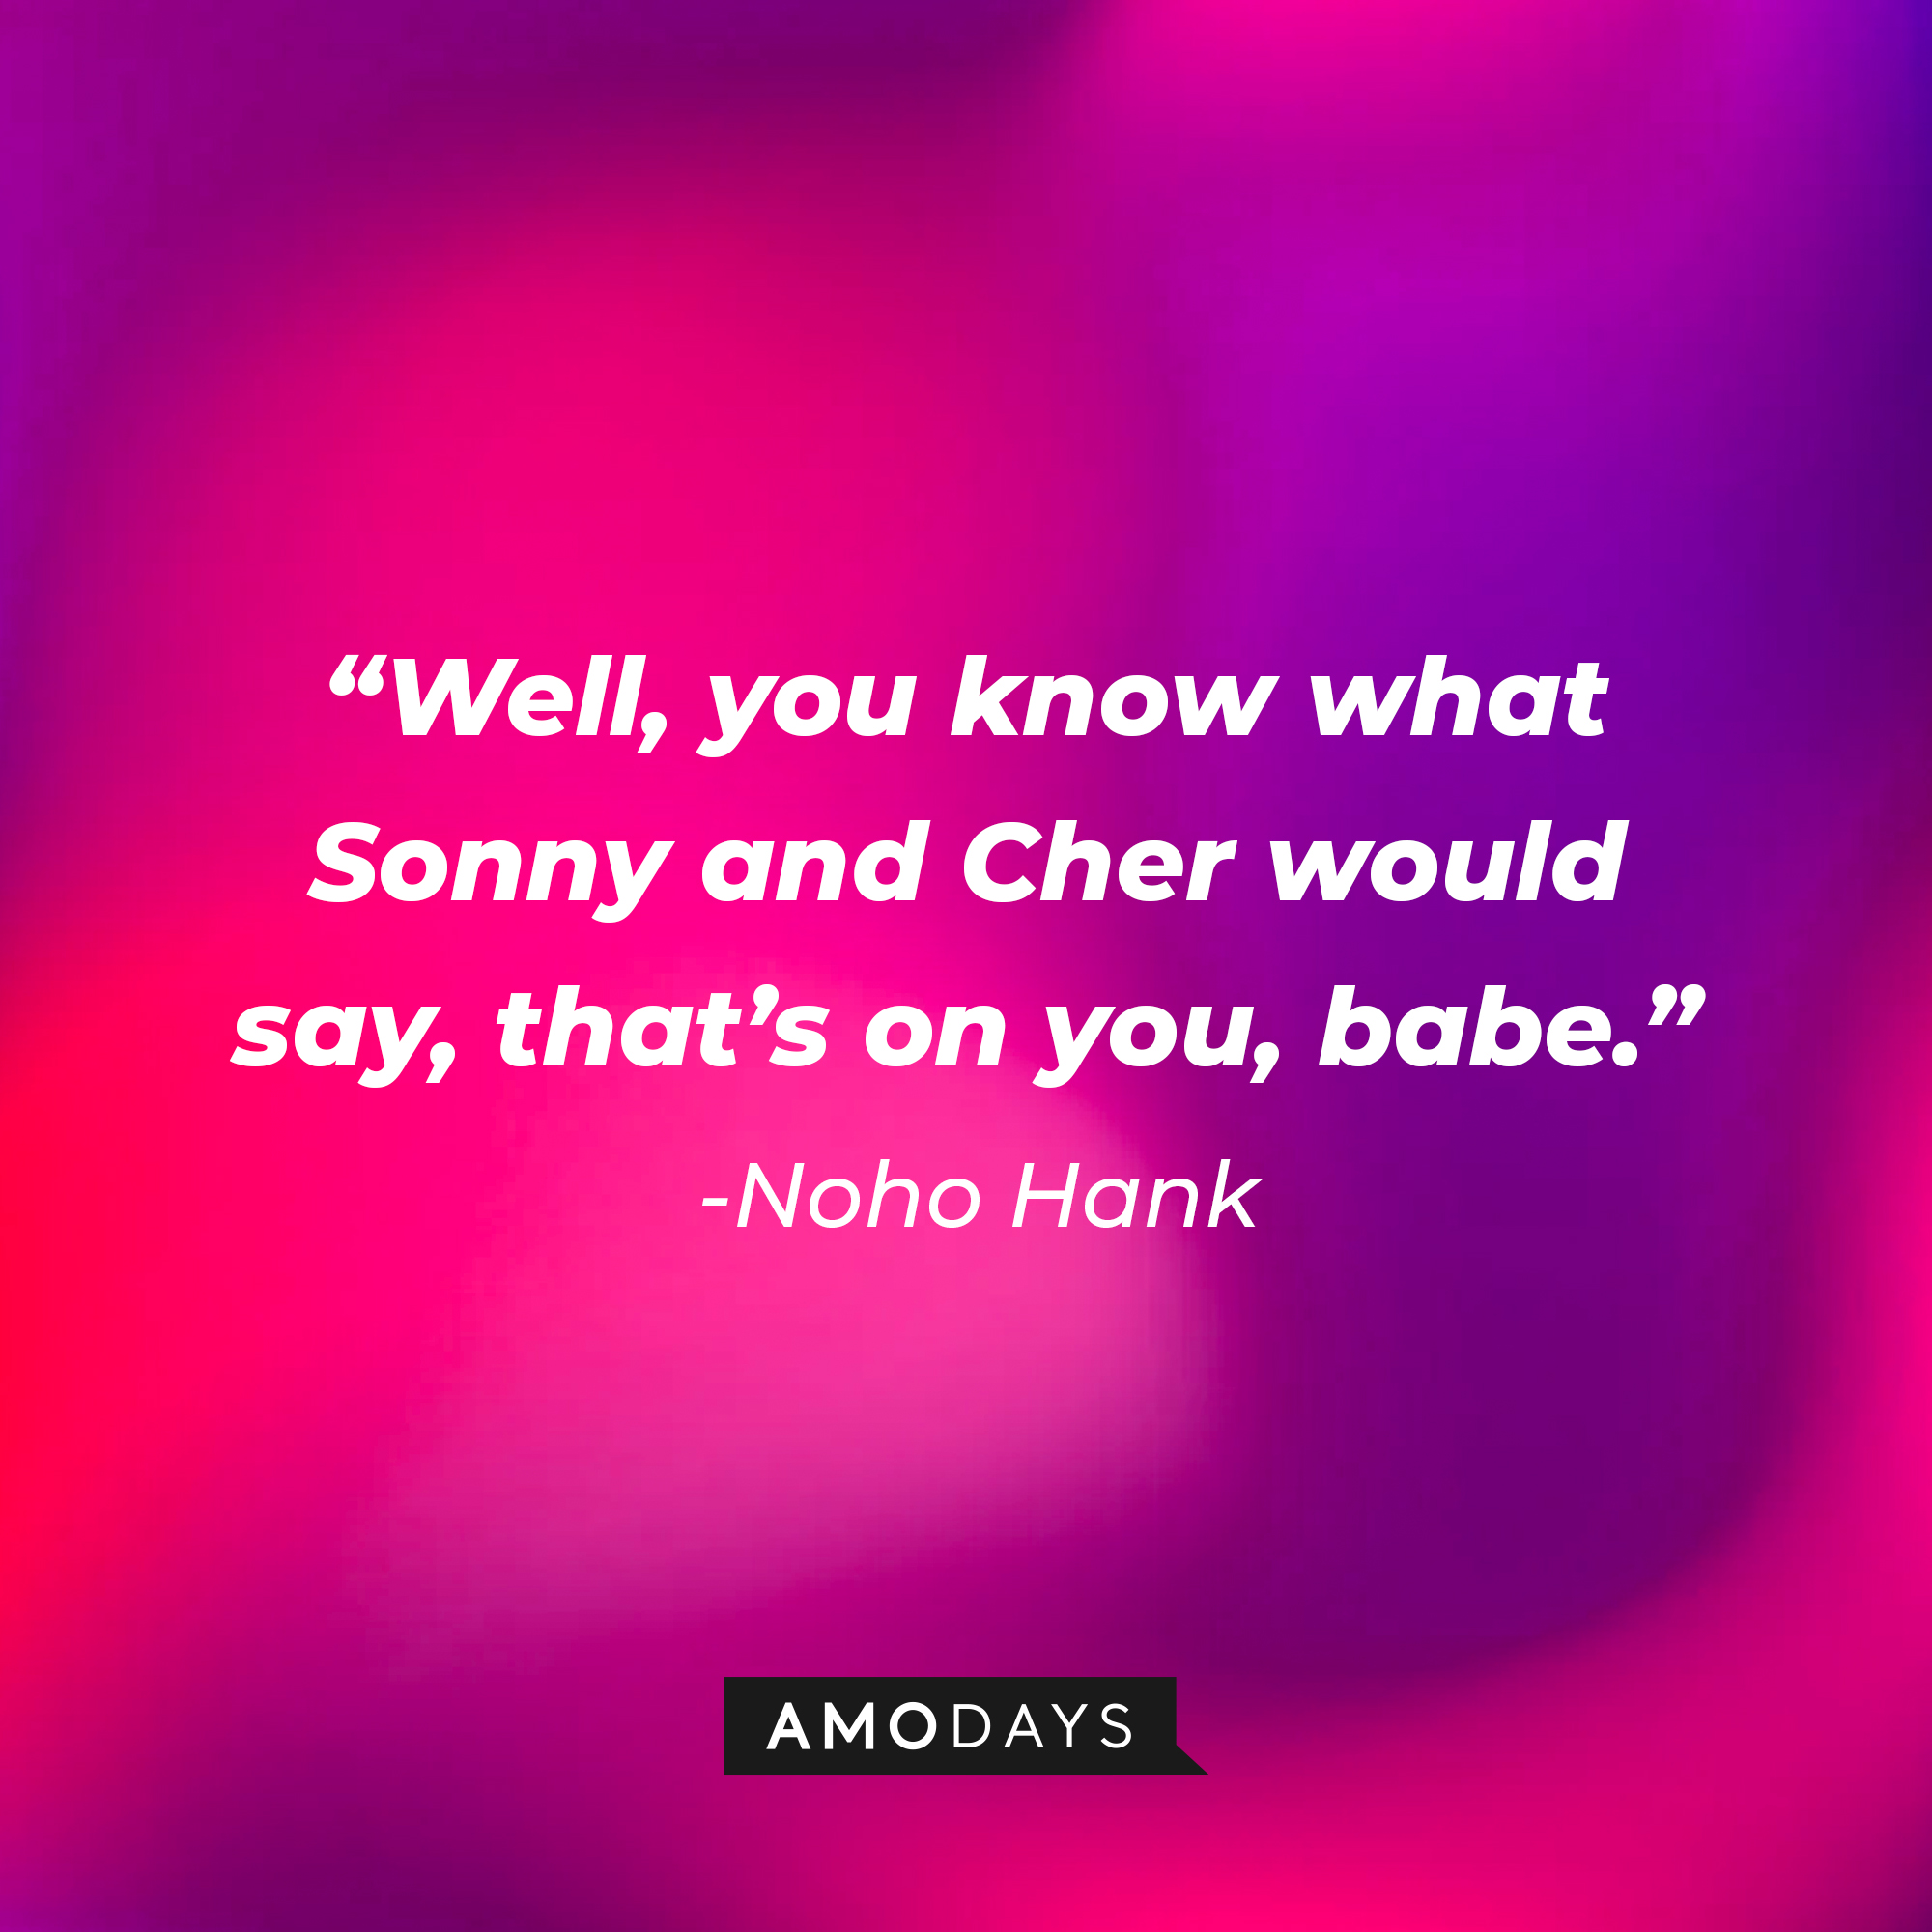 NoHo Hank, with his quote:“Well, you know what Sonny and Cher would say, that’s on you, babe.” | Source: AmoDays